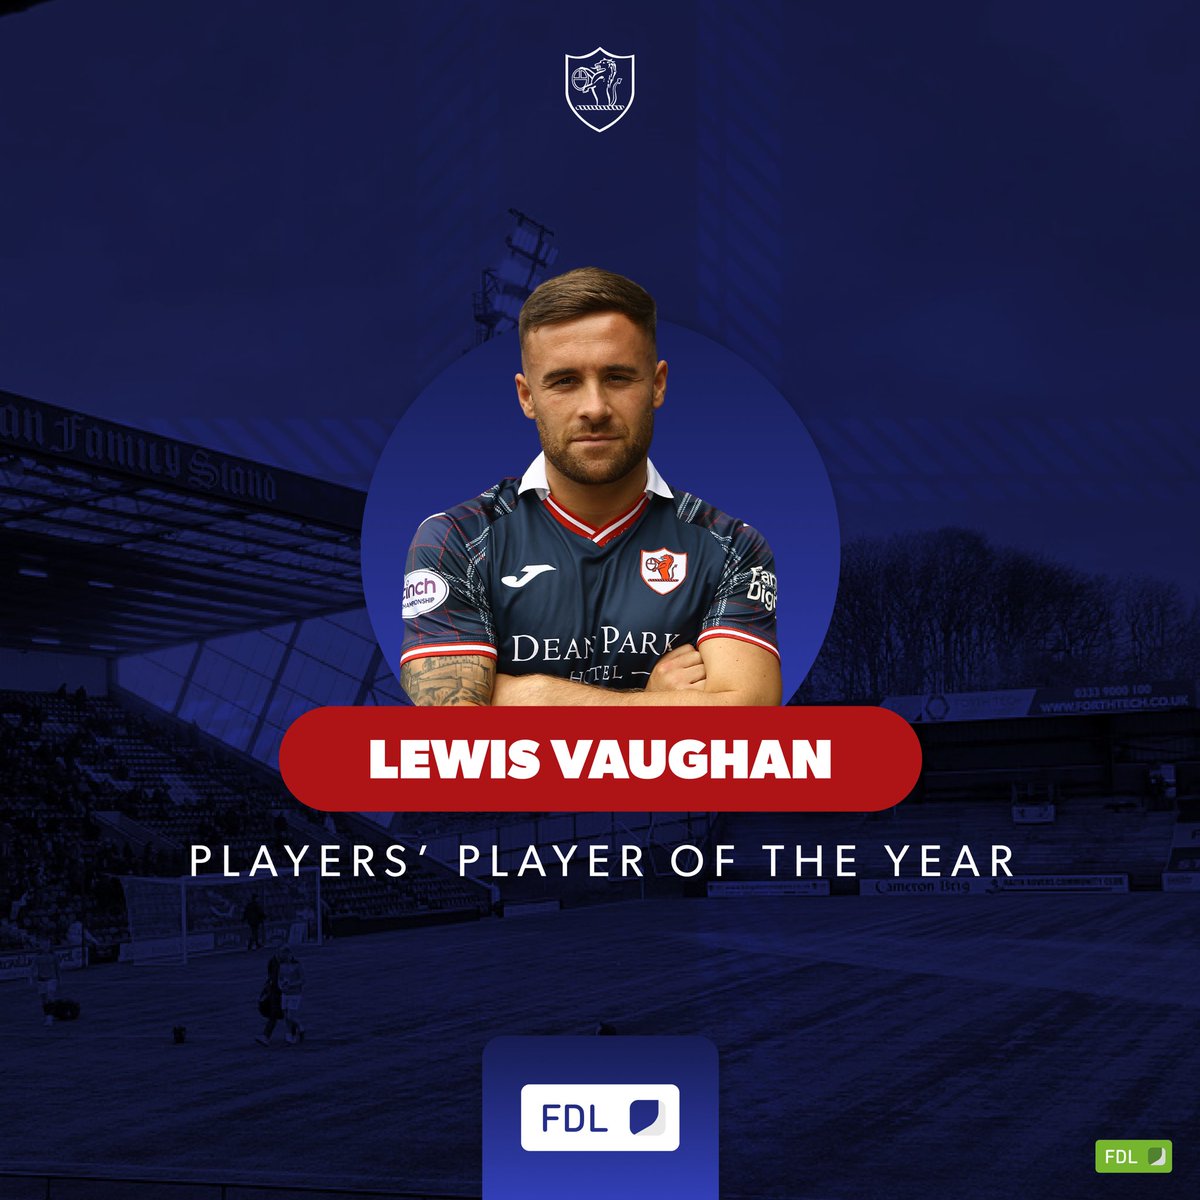 🏆 Players’ Player of the Year Another one of our own, Lewis Vaughan has won this year’s Players’ Player of the Year. A fantastic season as our top goal-scorer with 18 goals, it’s been a delight to see Lewis back at his best. Congrats, Lewy! 🤝 @FordsDalyLegal #YouBelong